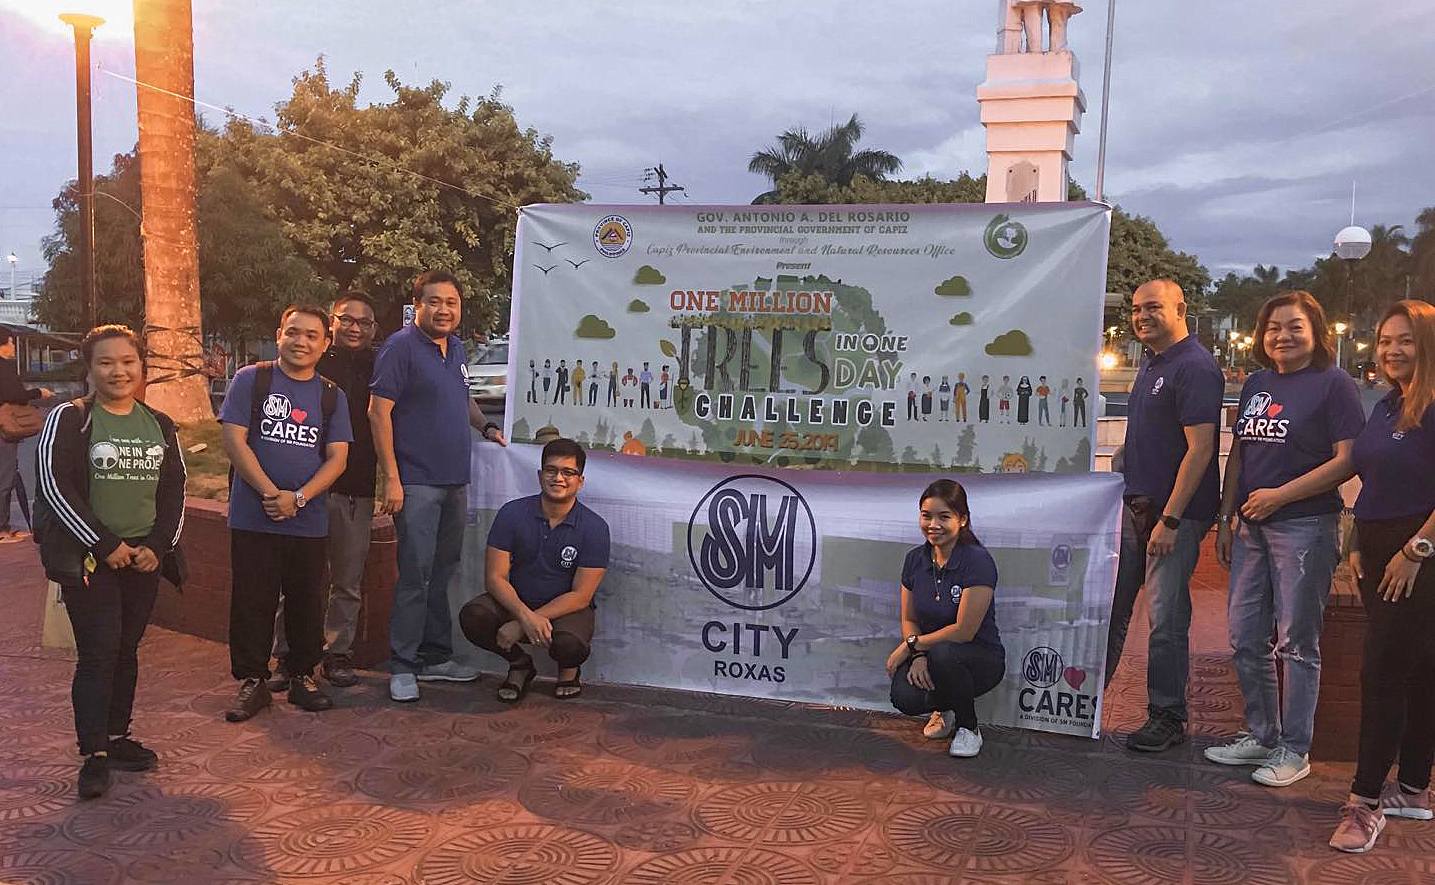 SM City Joins One Million Tree In One Day Challenge in Capiz